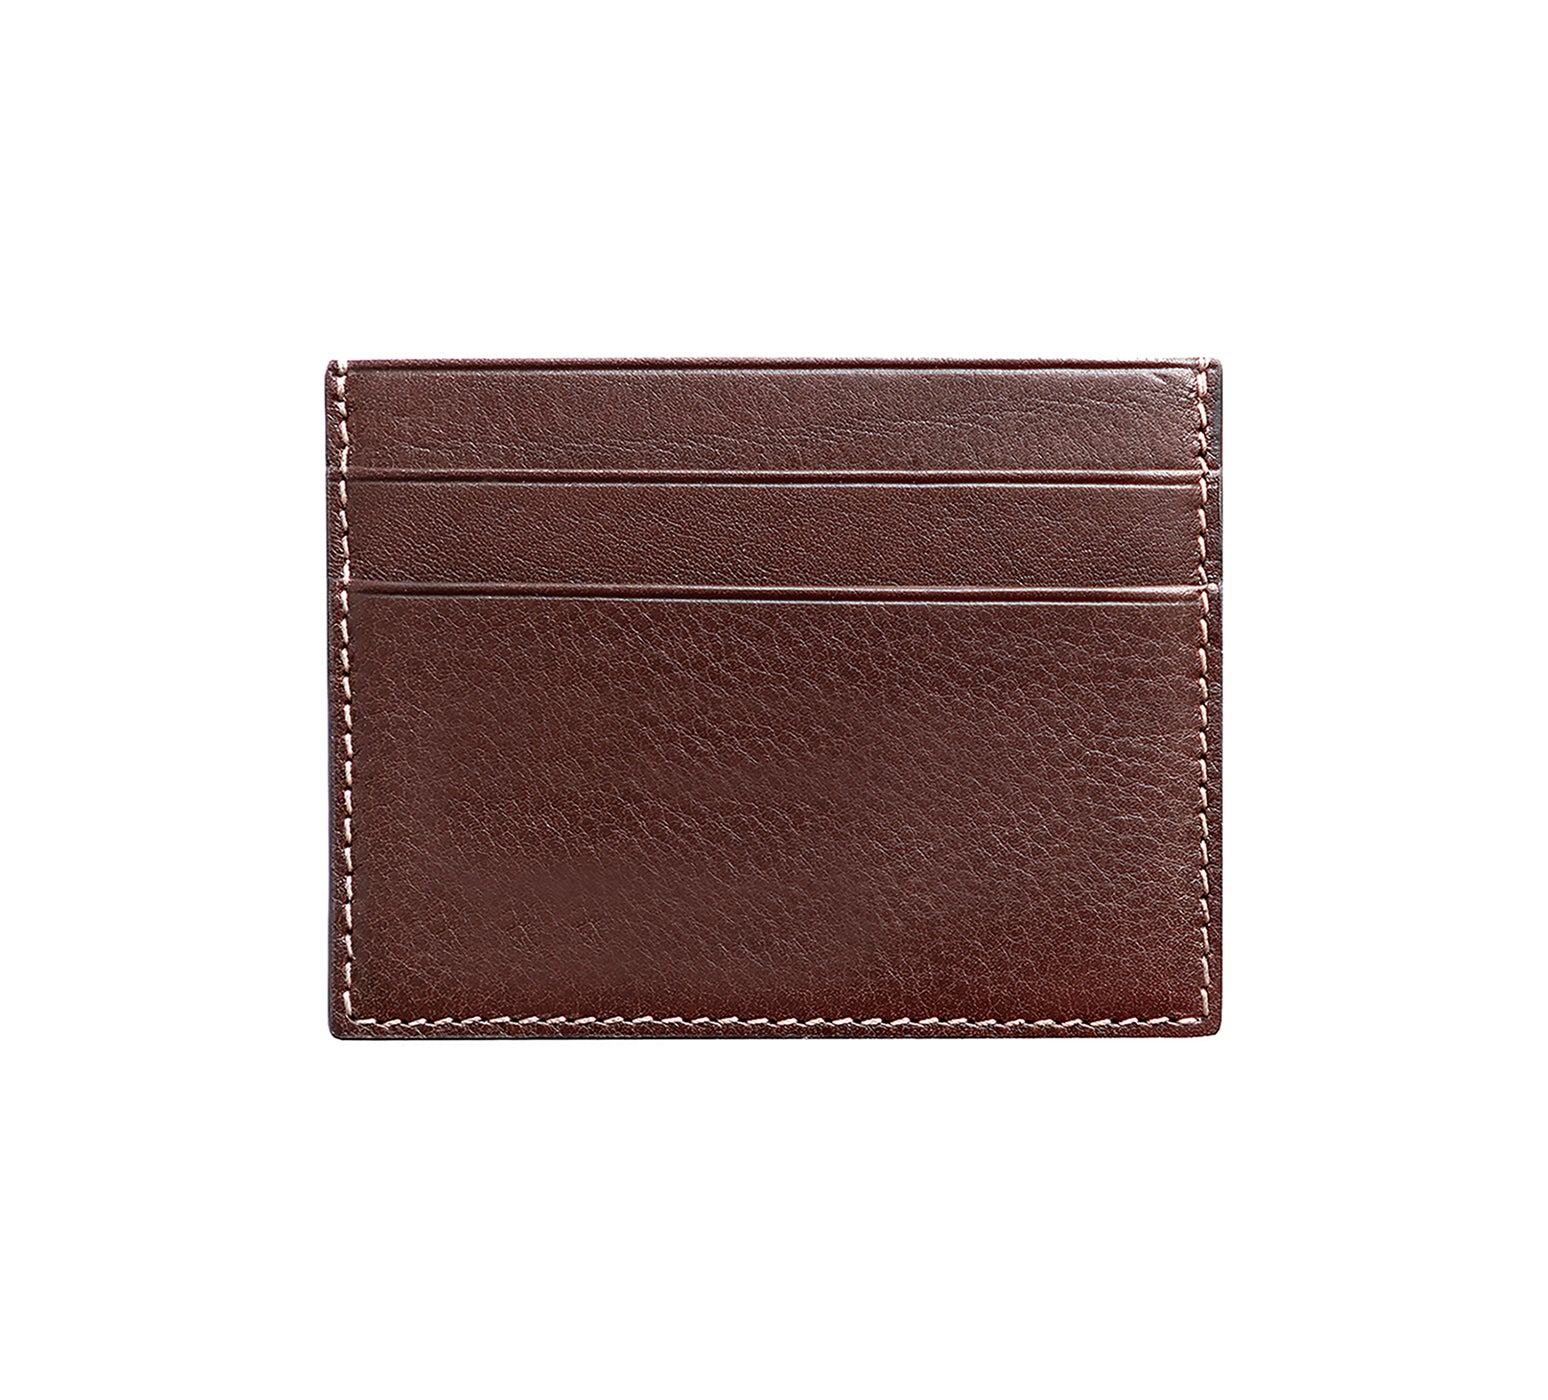 Mens Leather Card Holder in 'Dark Brown' showing reverse side.